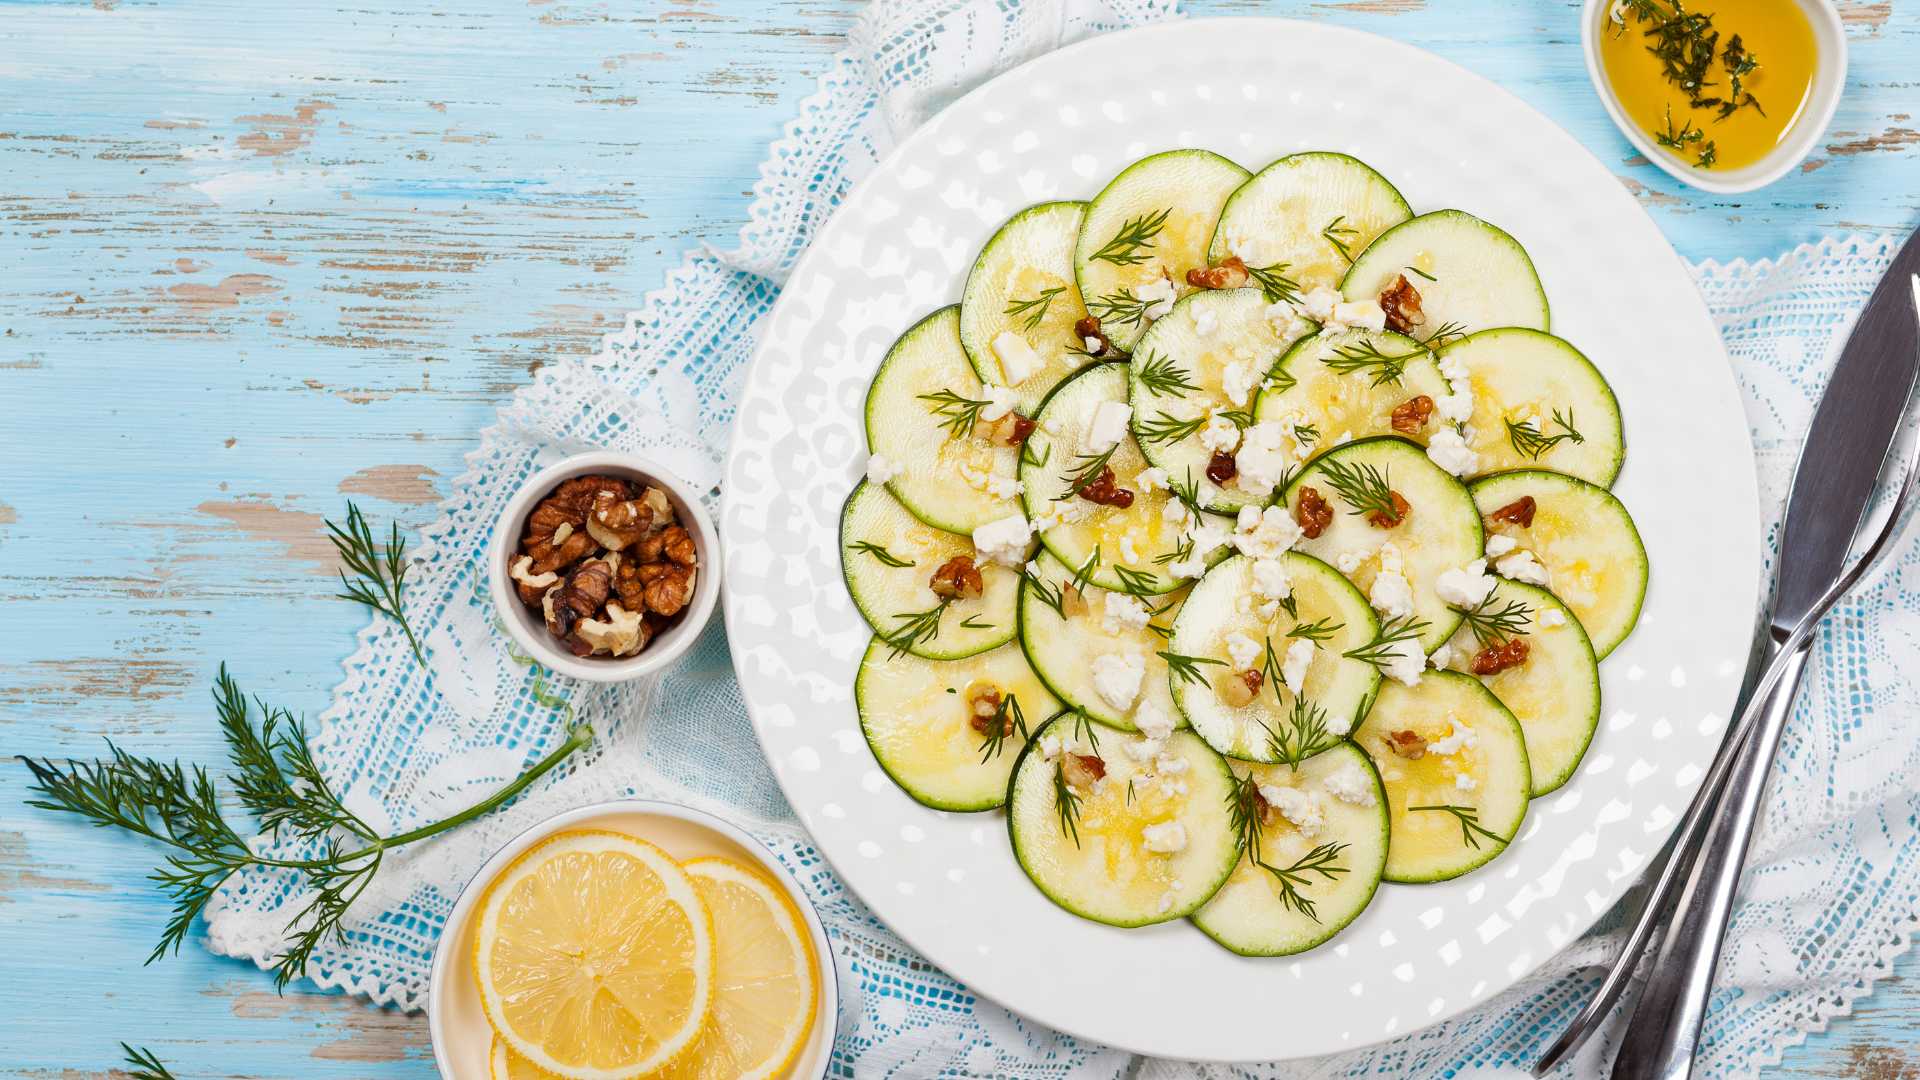 Zucchini Side Dishes to Mix Up Your Dinner Routine